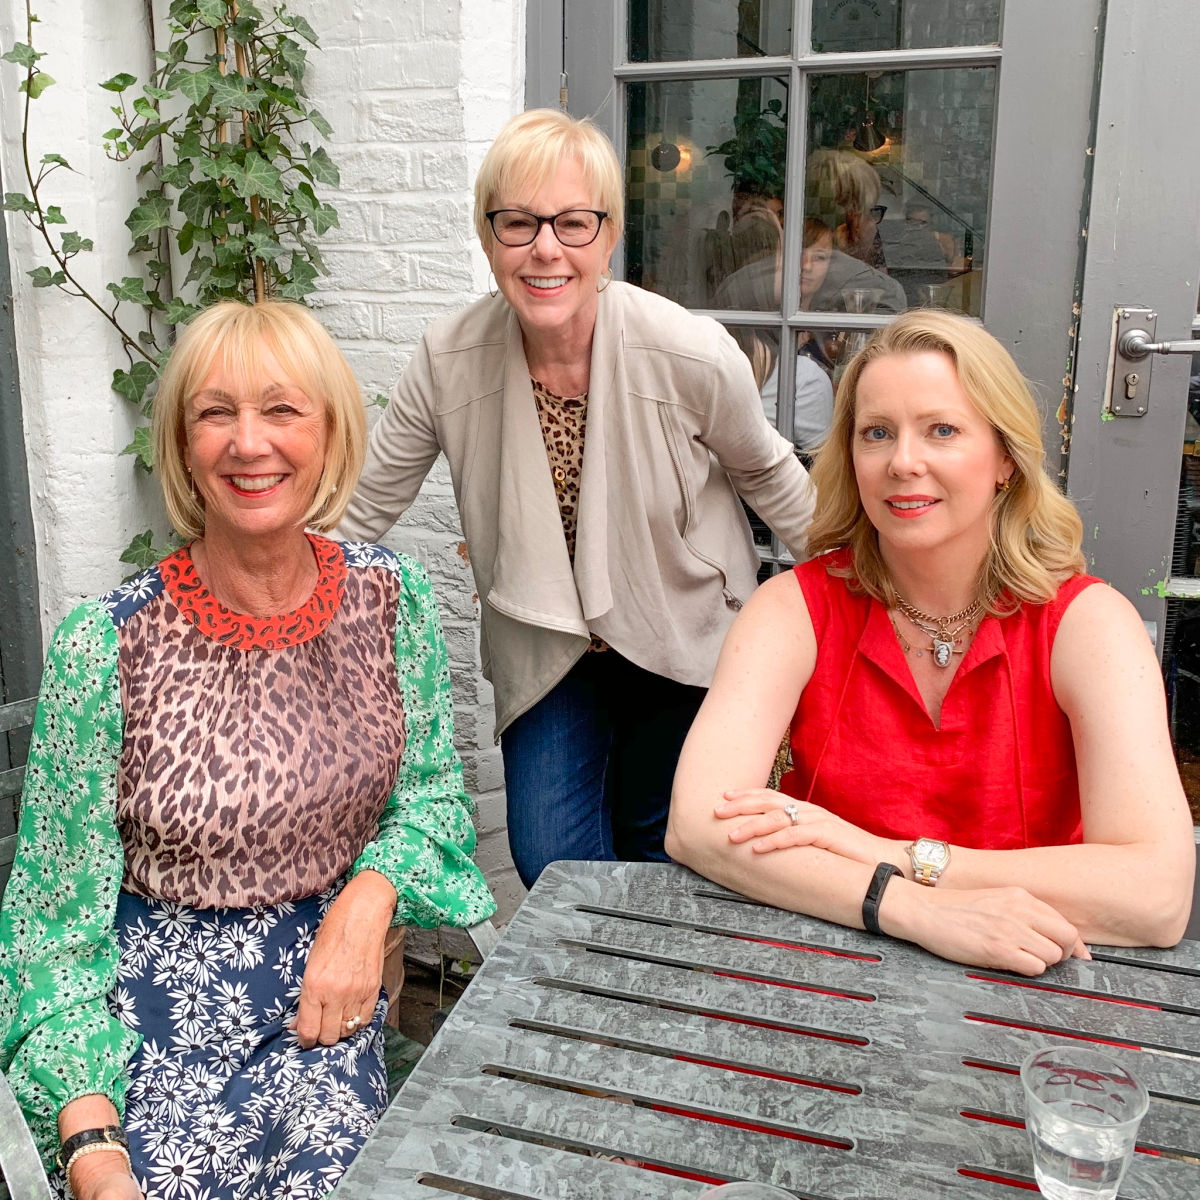 Bloggers meet up in London. Greetje, Susan B. and Lisa. Details at une femme d'un certain age.